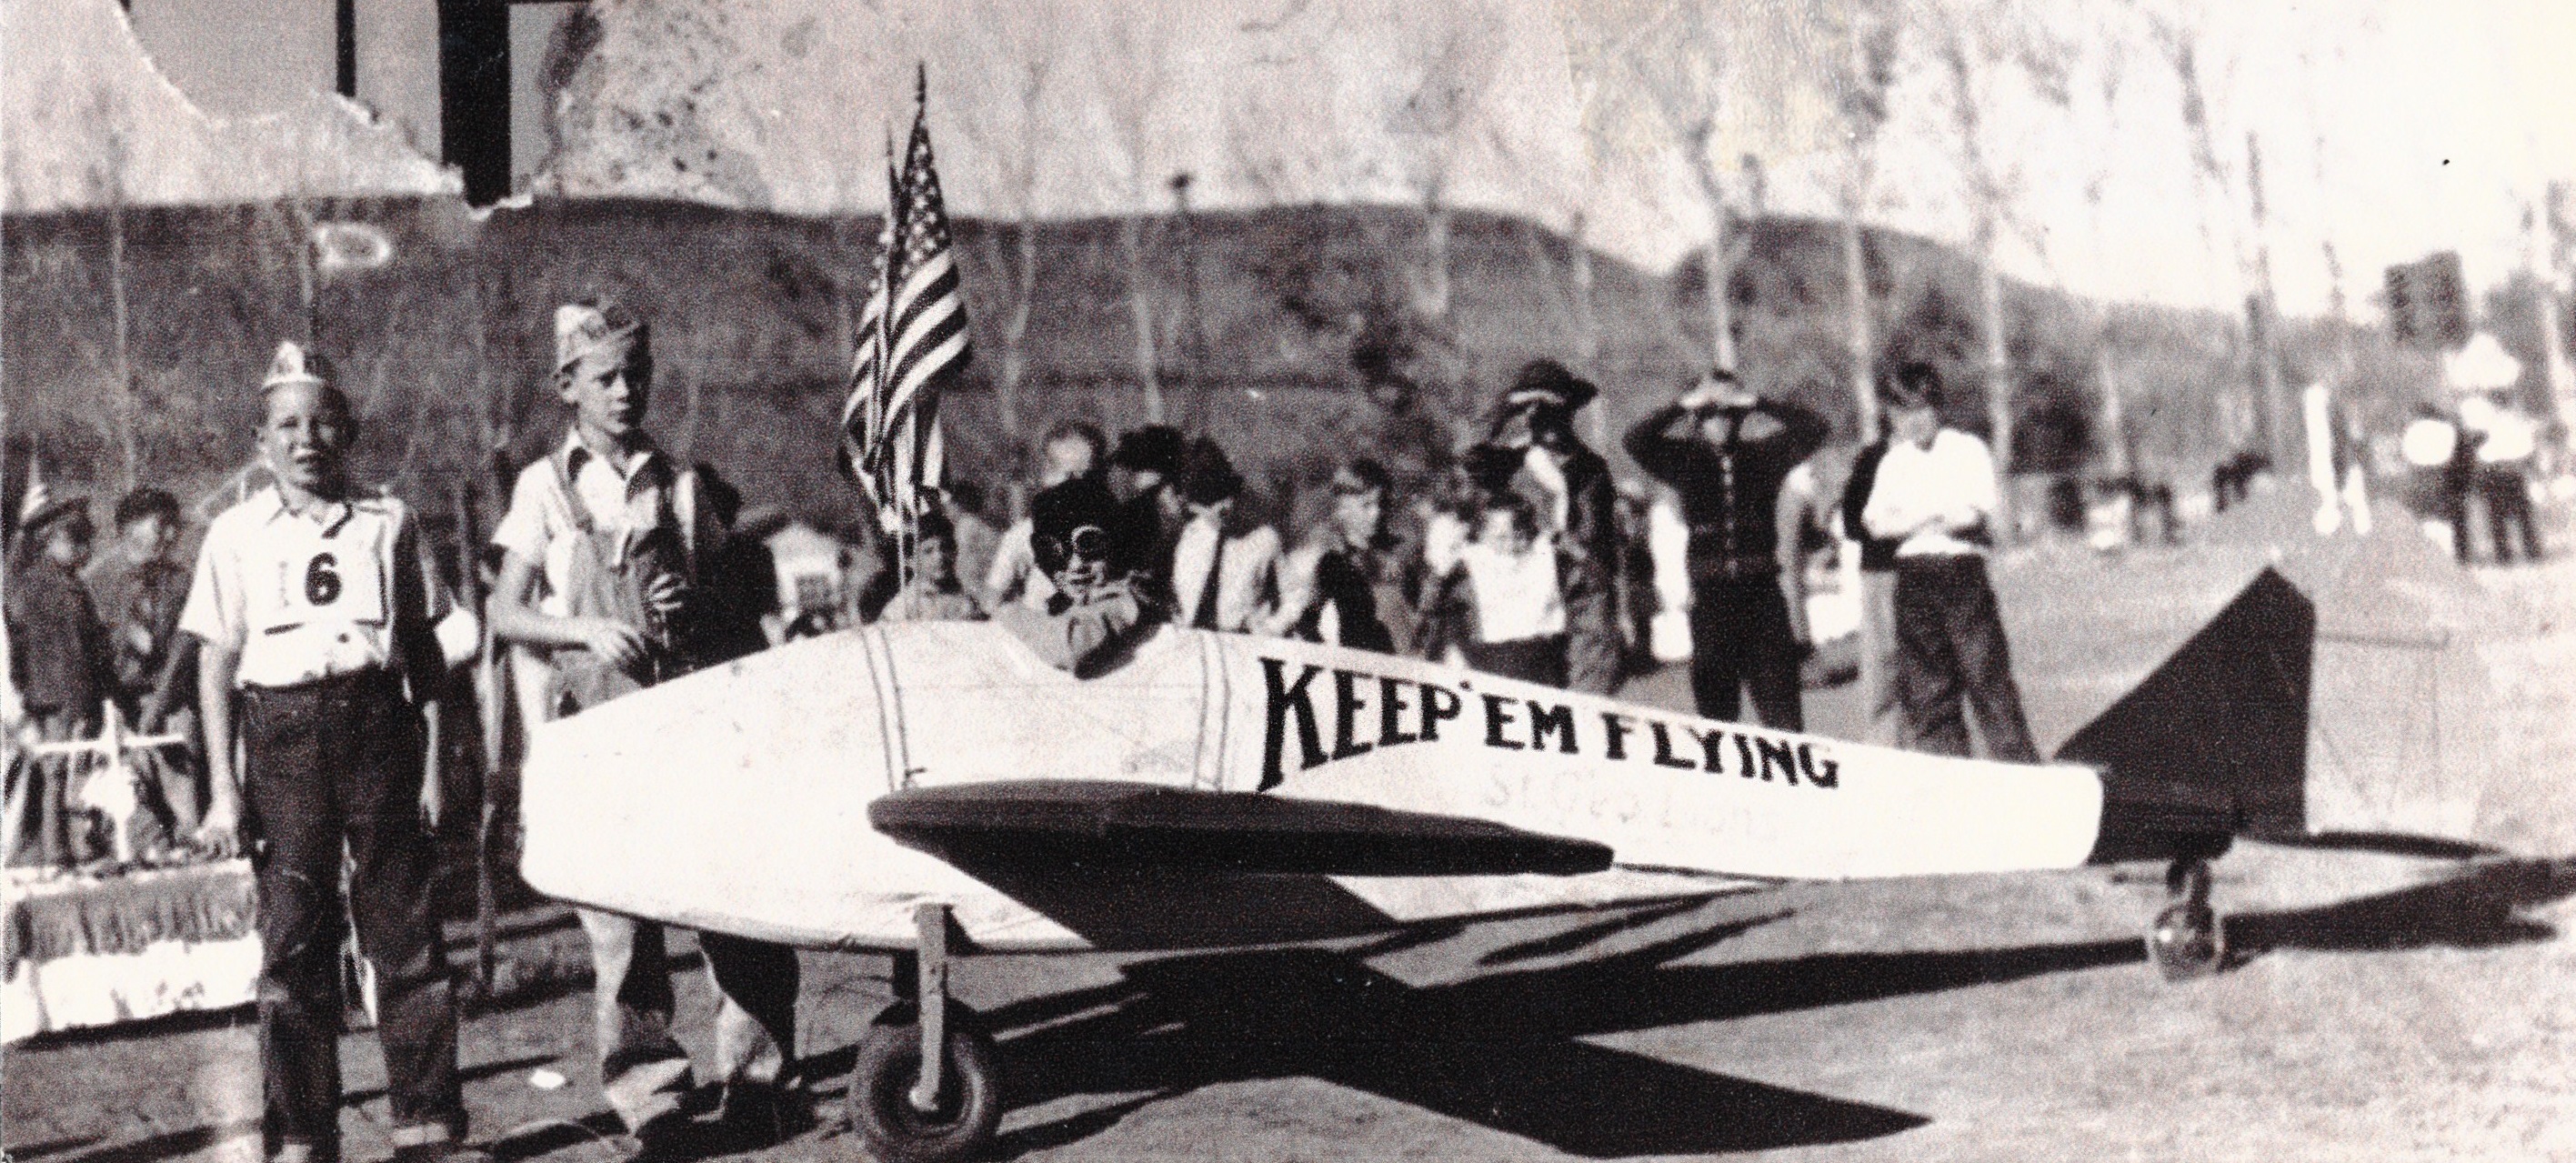 kids with a model airplane in what looks like a patriotic parade